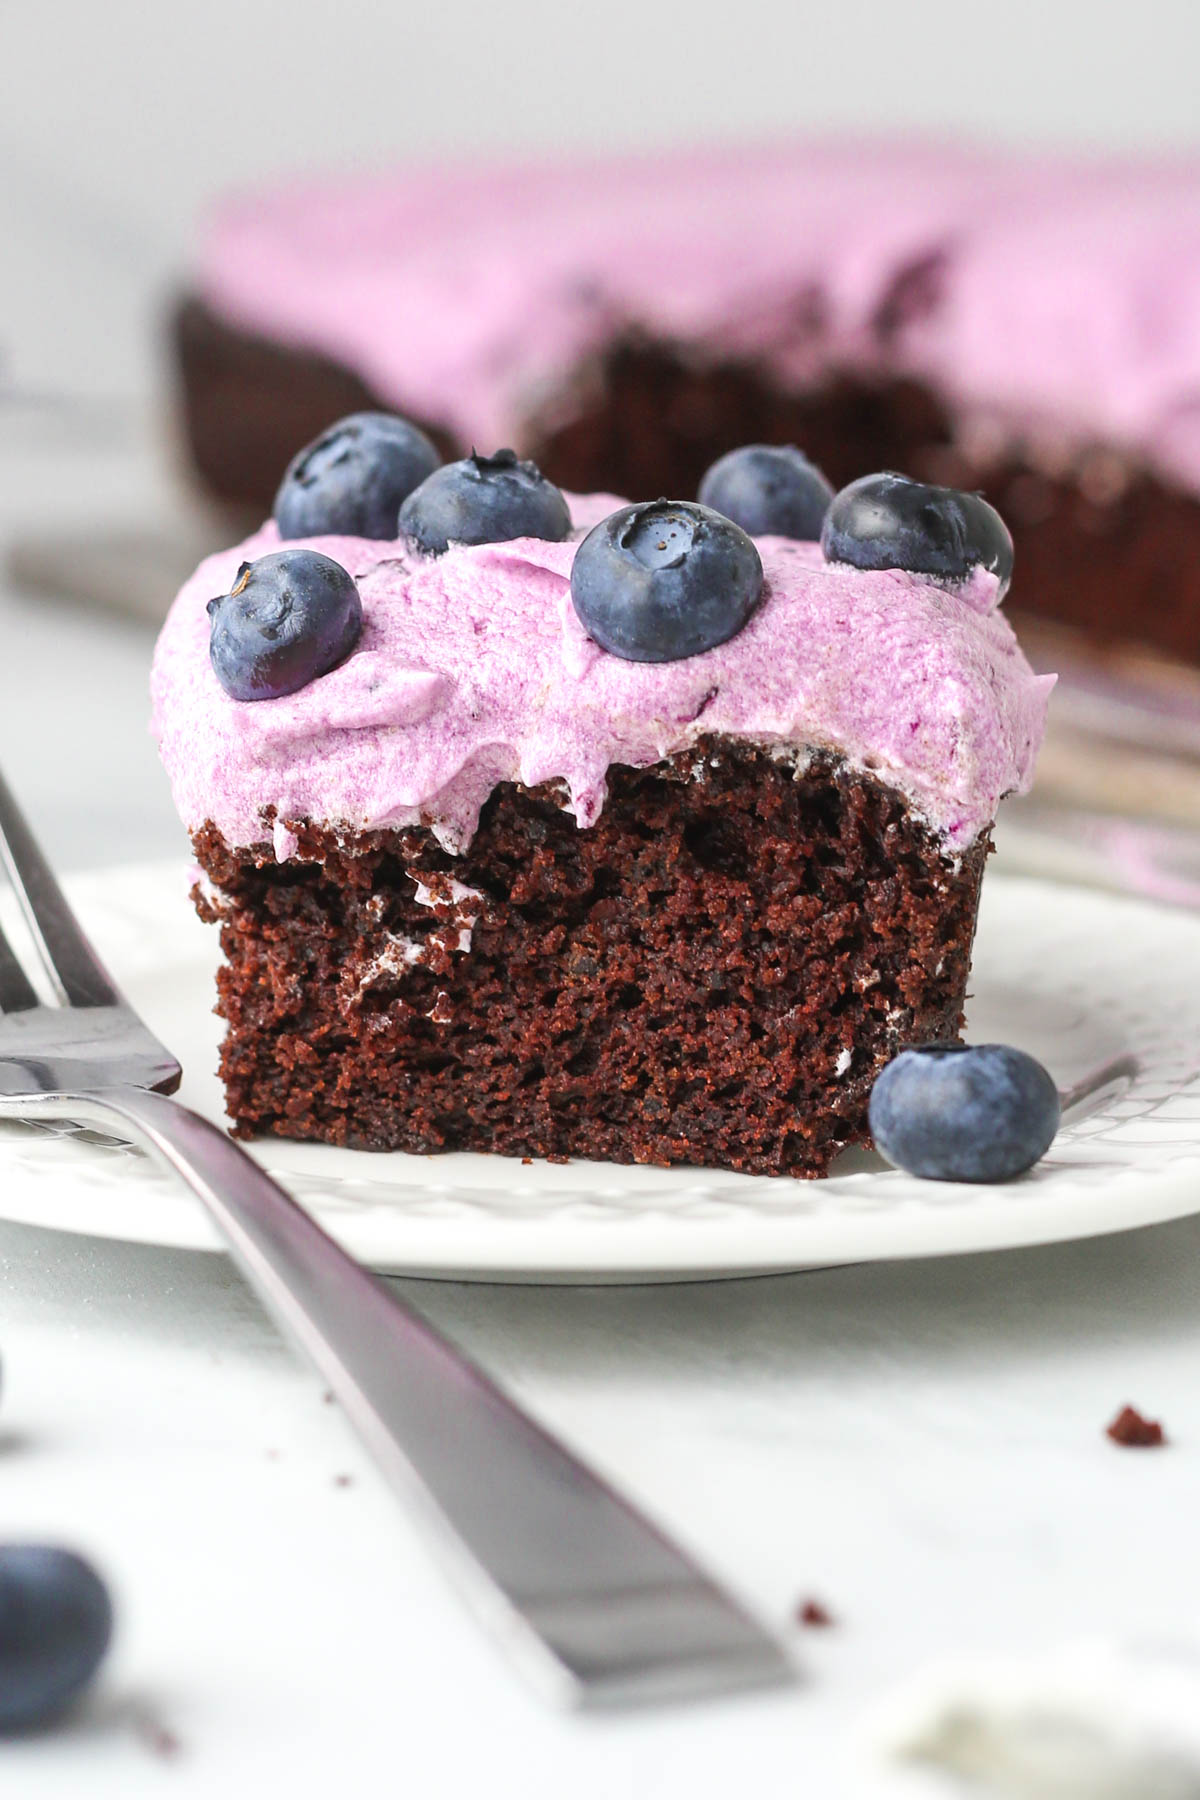 A square slice of blueberry chocolate cake with purple frosting on a small dessert plate.